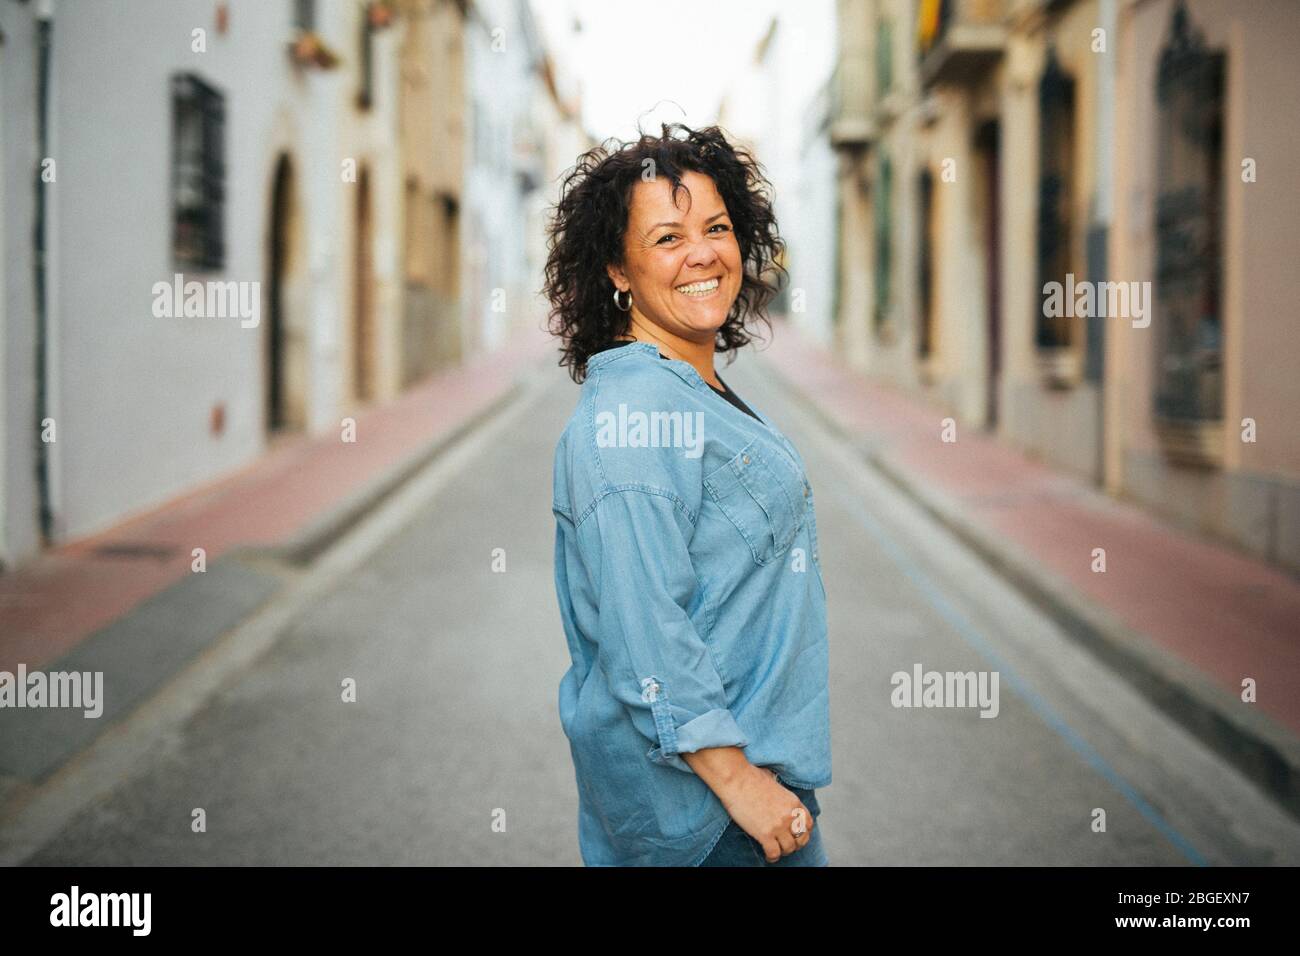 Portrait of a middle-aged smiling woman  on the street Stock Photo